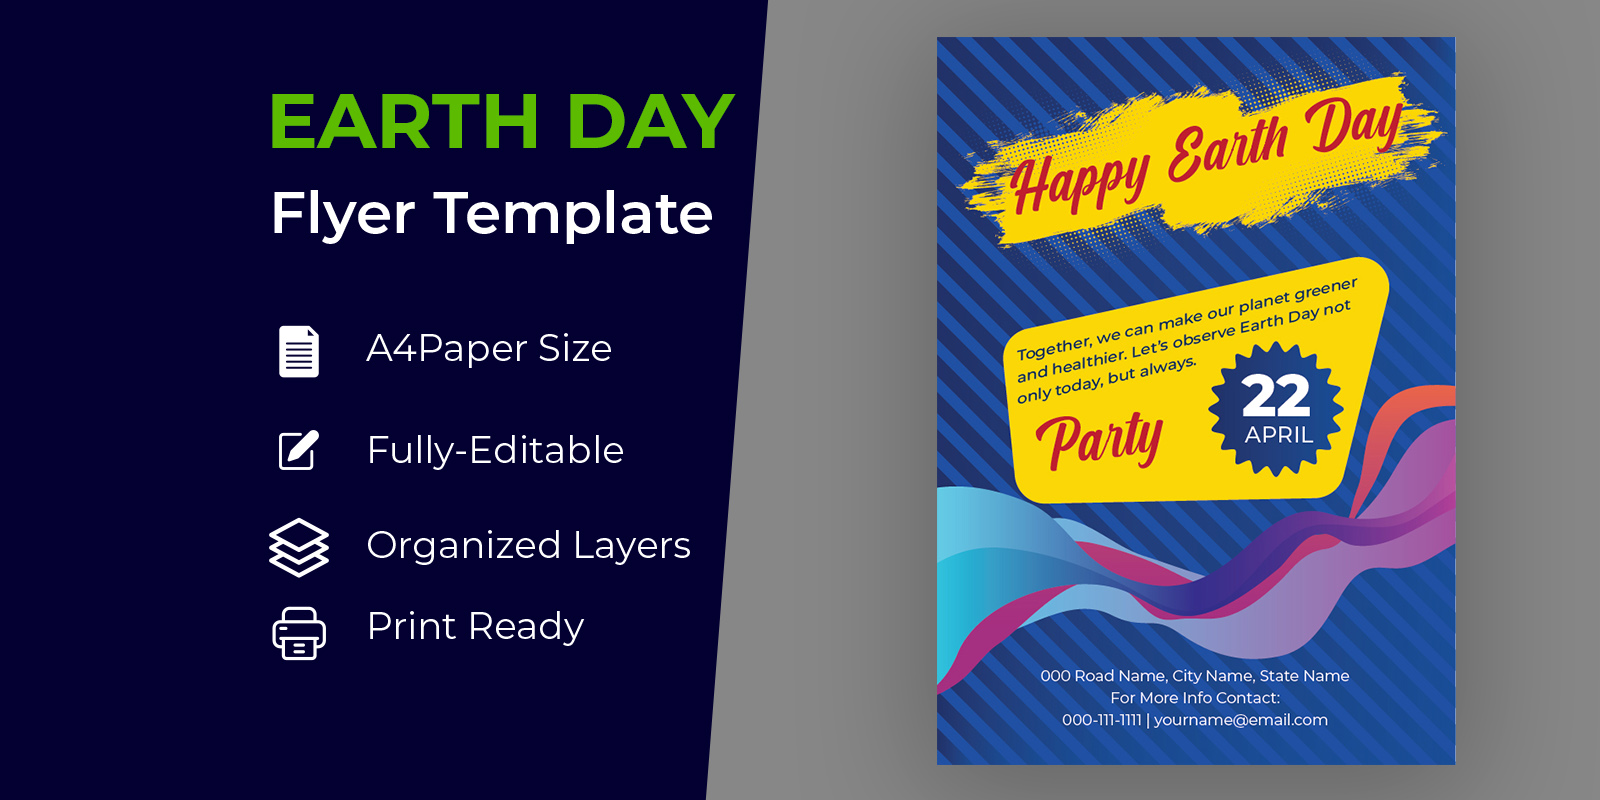 International Earth Day Poster Design Corporate identity template